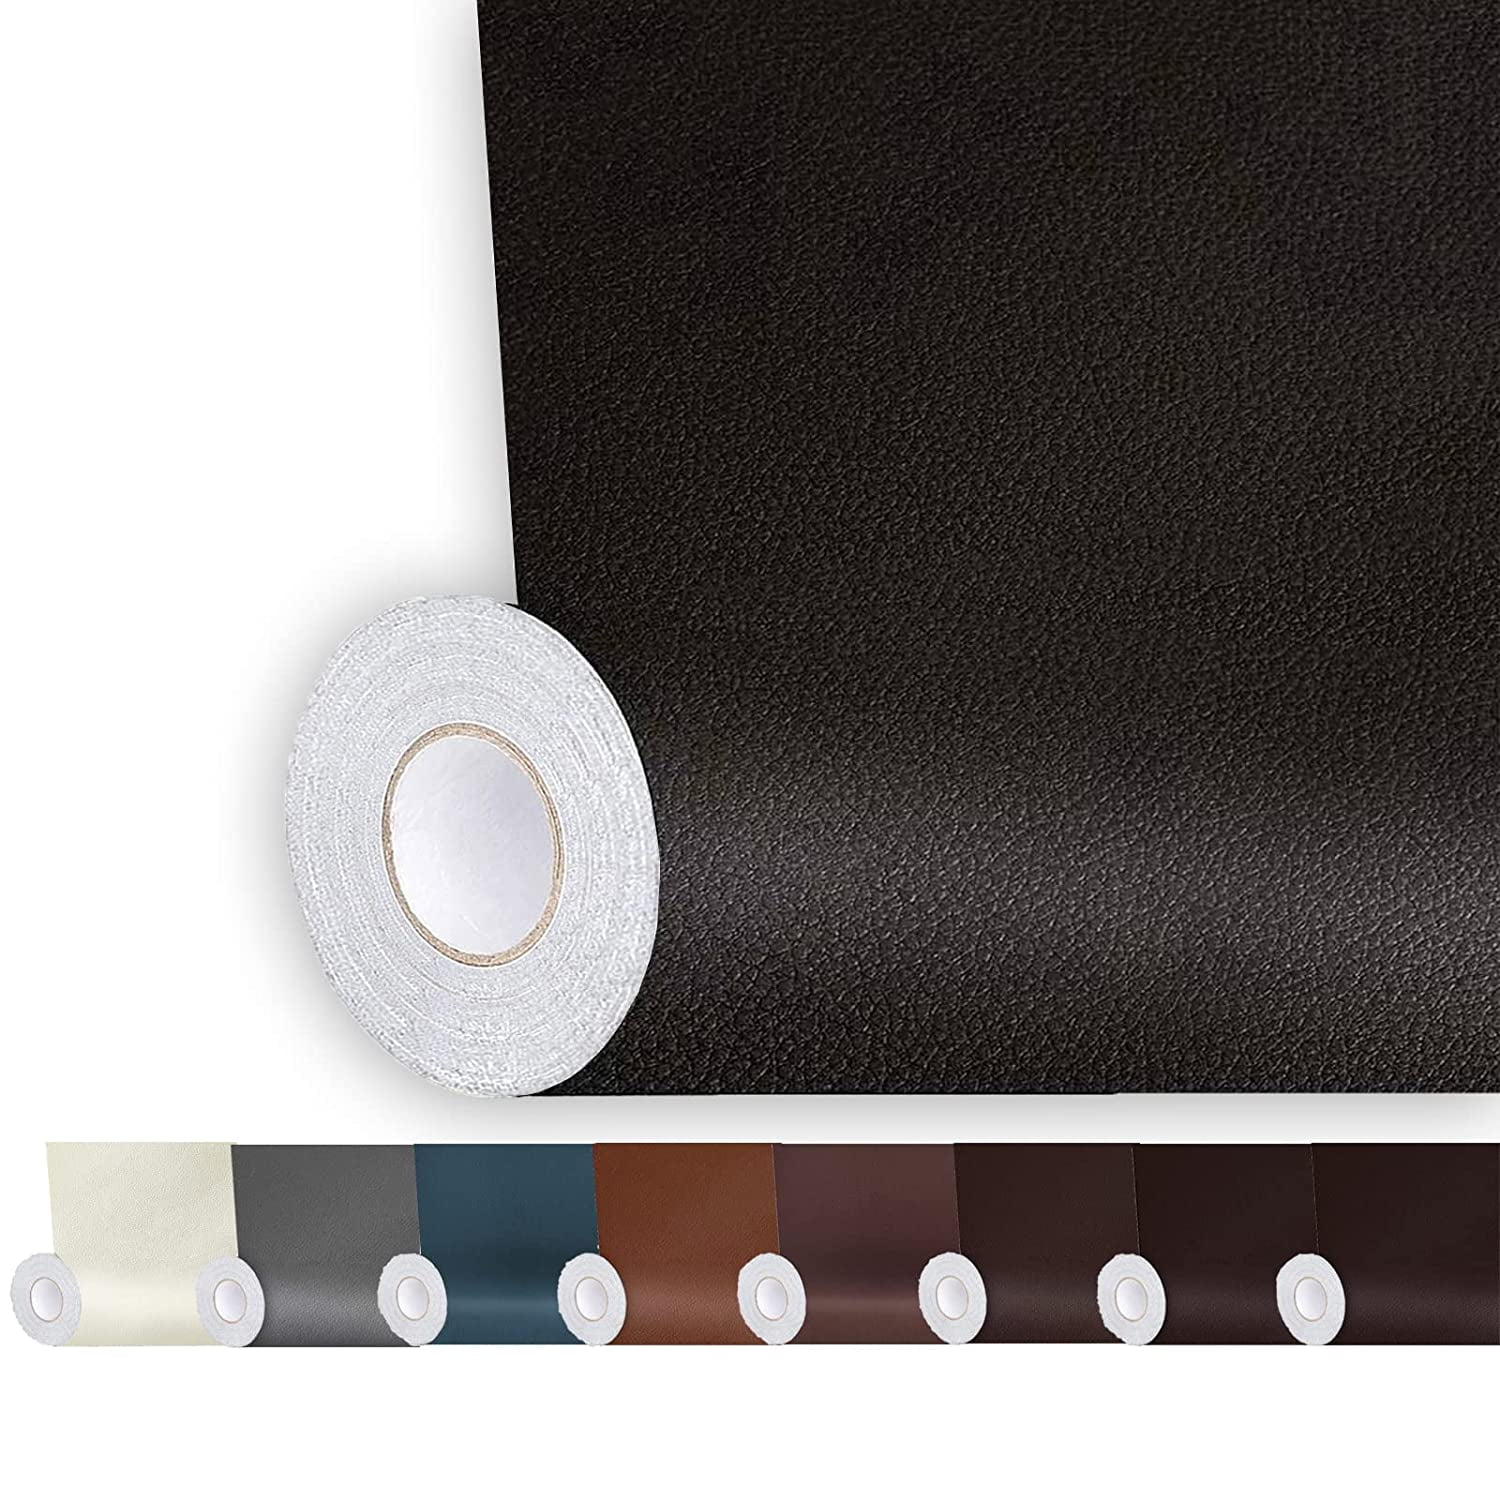 Self-adhesive Leather Repair Sticker Multi Color Pu Leather Upholstery  Repair Tape For Couch, Car Seat, Wall, Diy